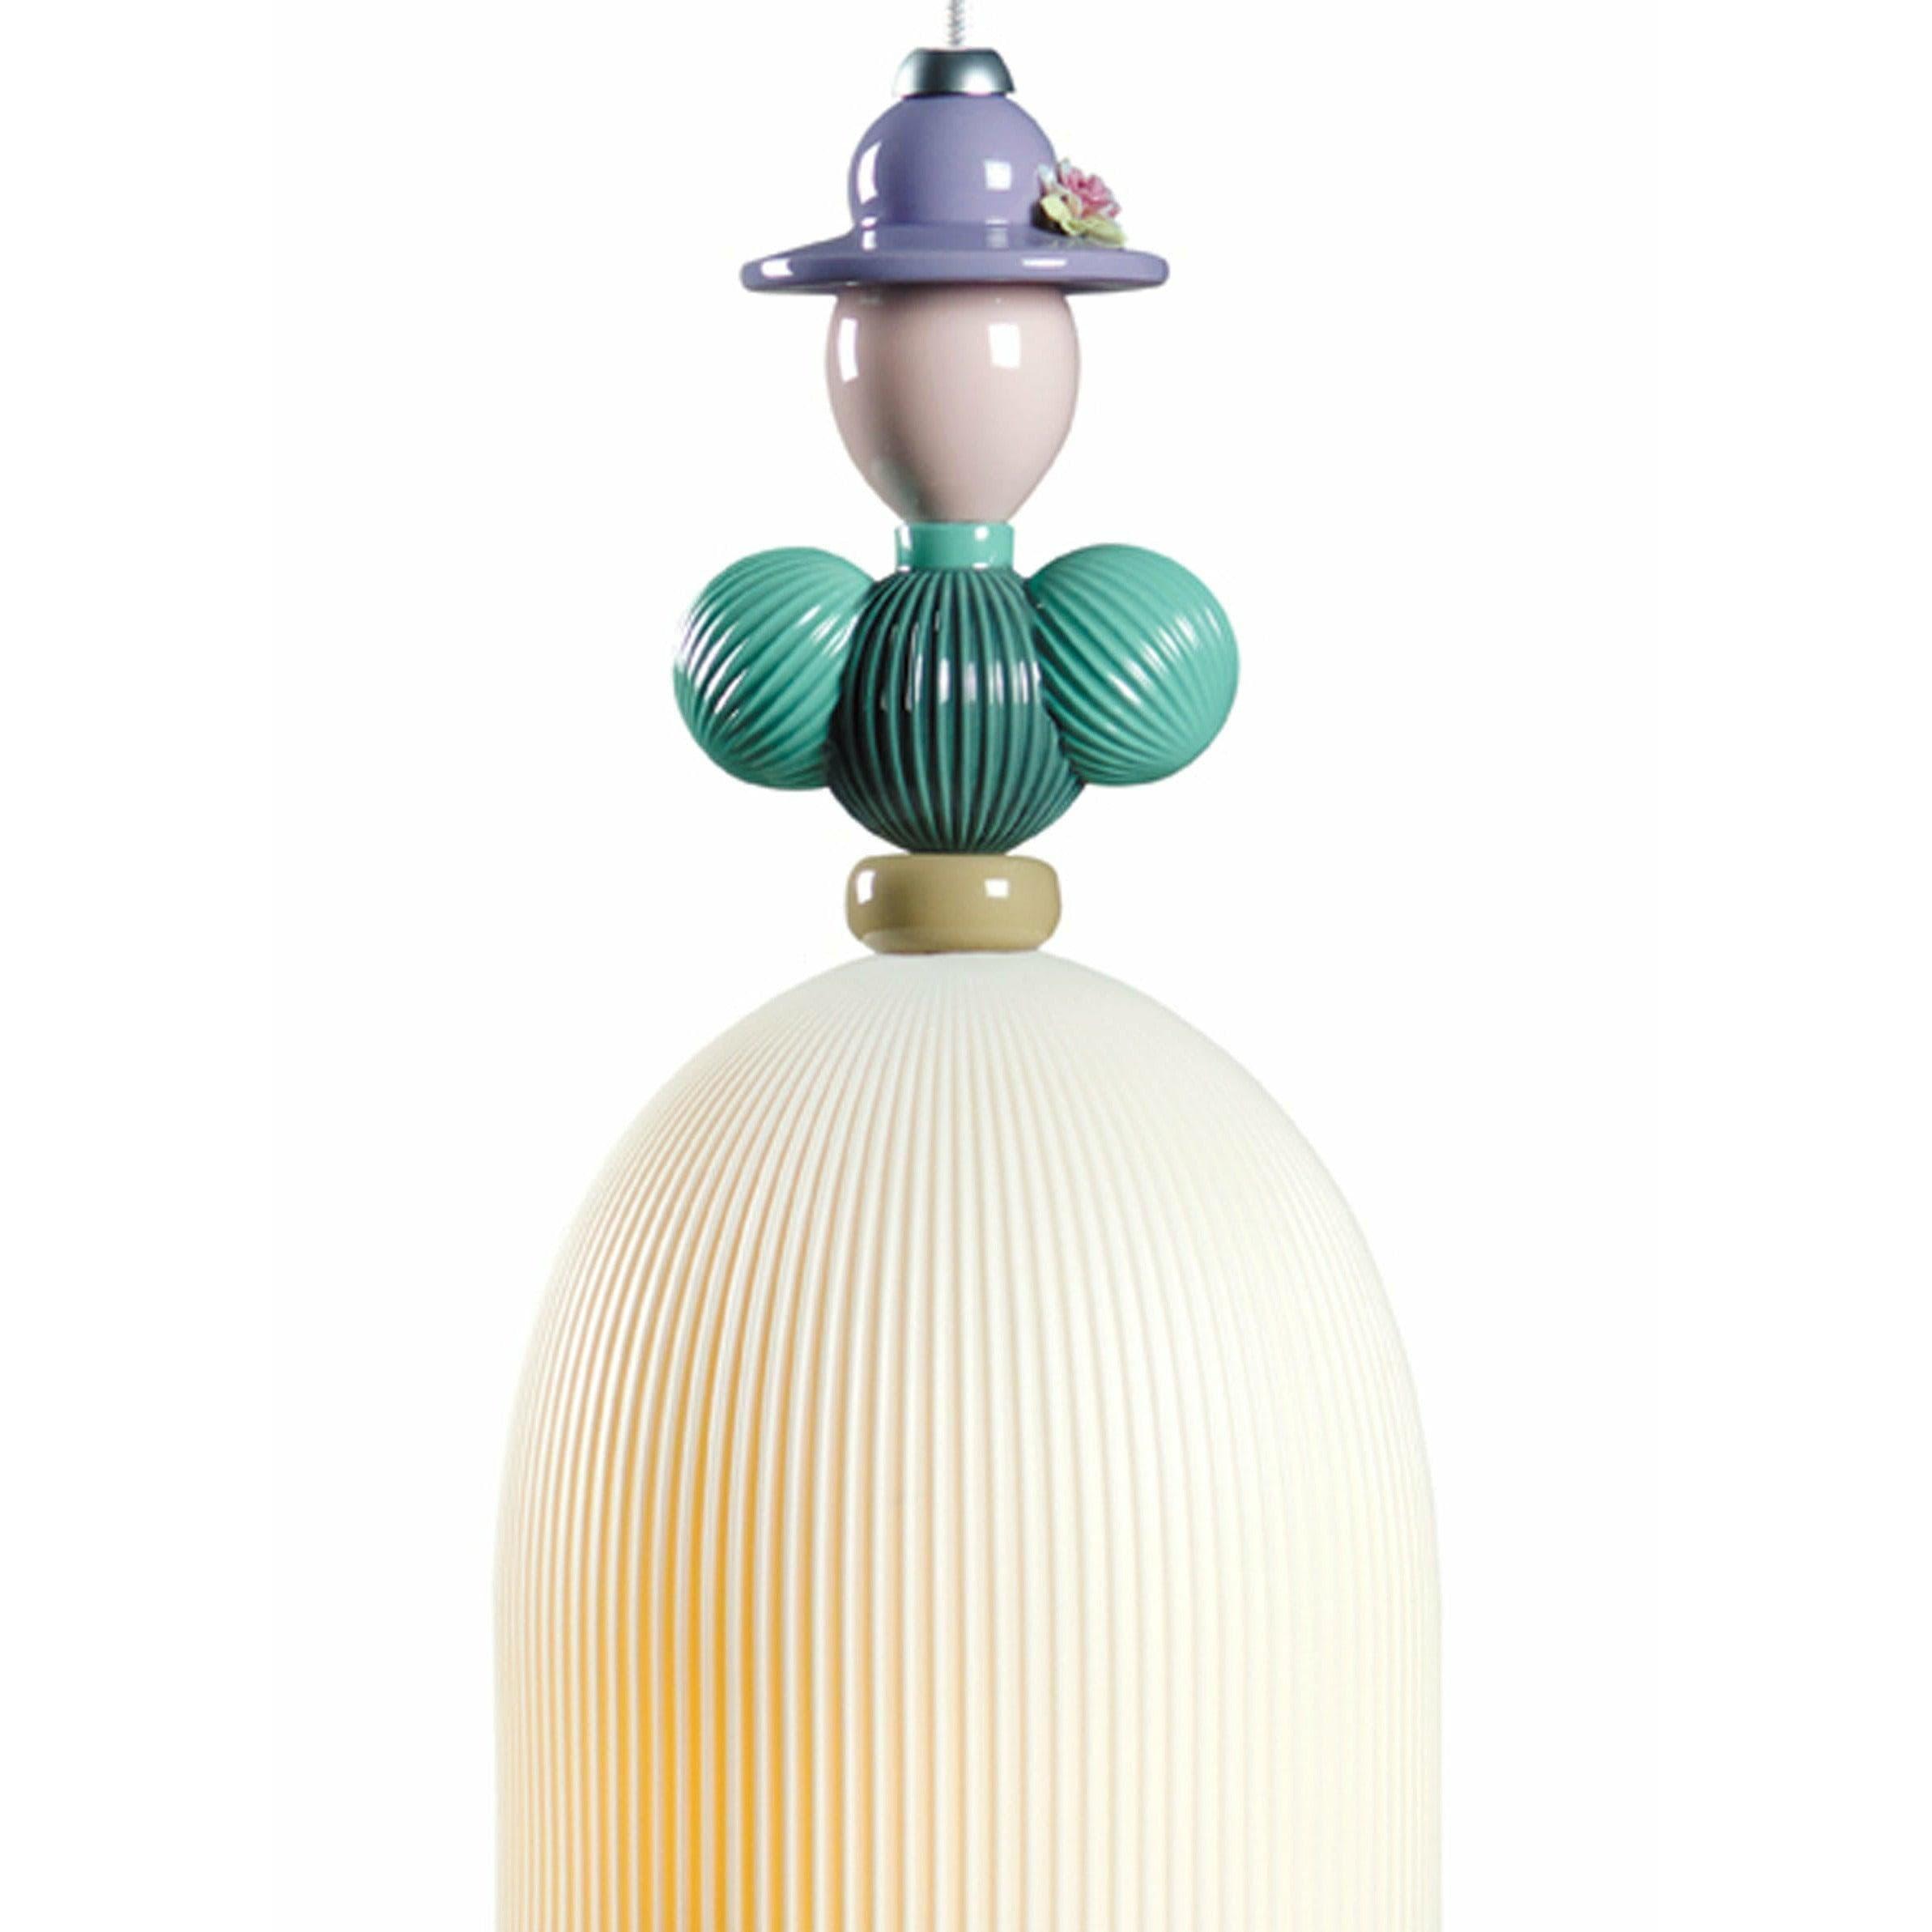 Lladro - Mademoiselle Béatrice Ceiling Lamp - 01023534 | Montreal Lighting & Hardware